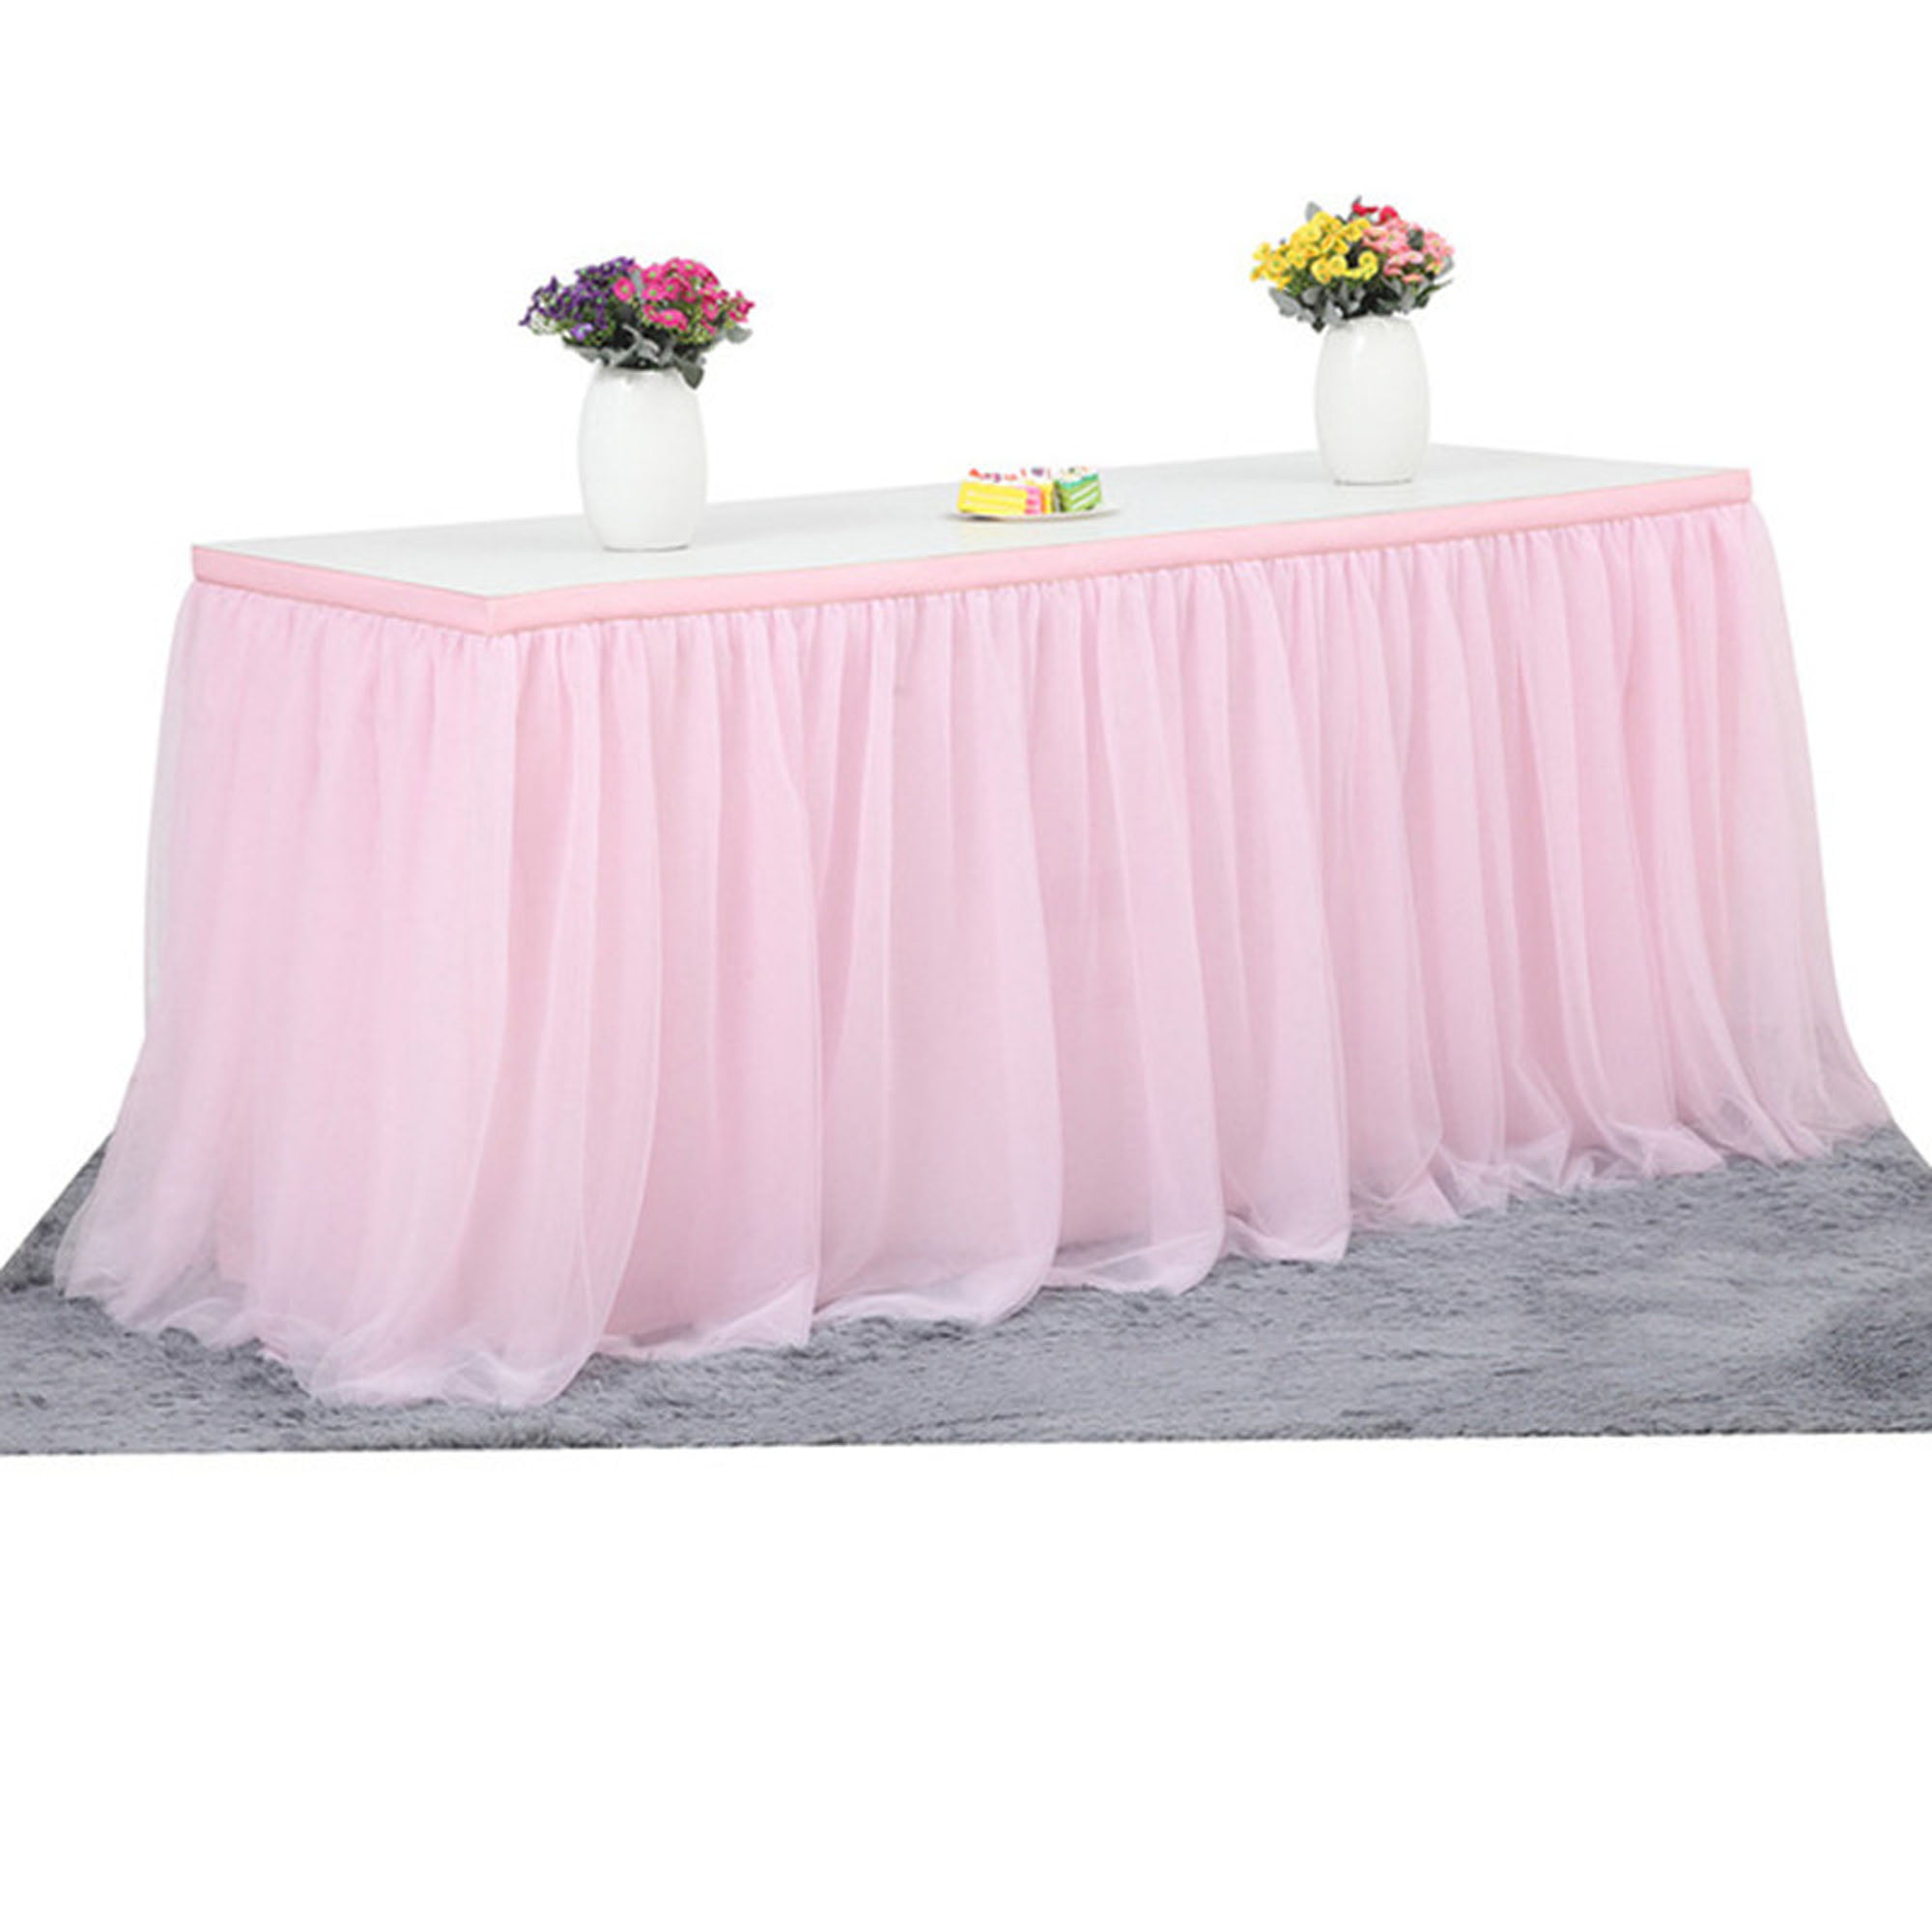 72 x 30 inch Handmade Table Skirt Tablecloth Tutu Tulle for Party Wedding Home Decor Rose Red 